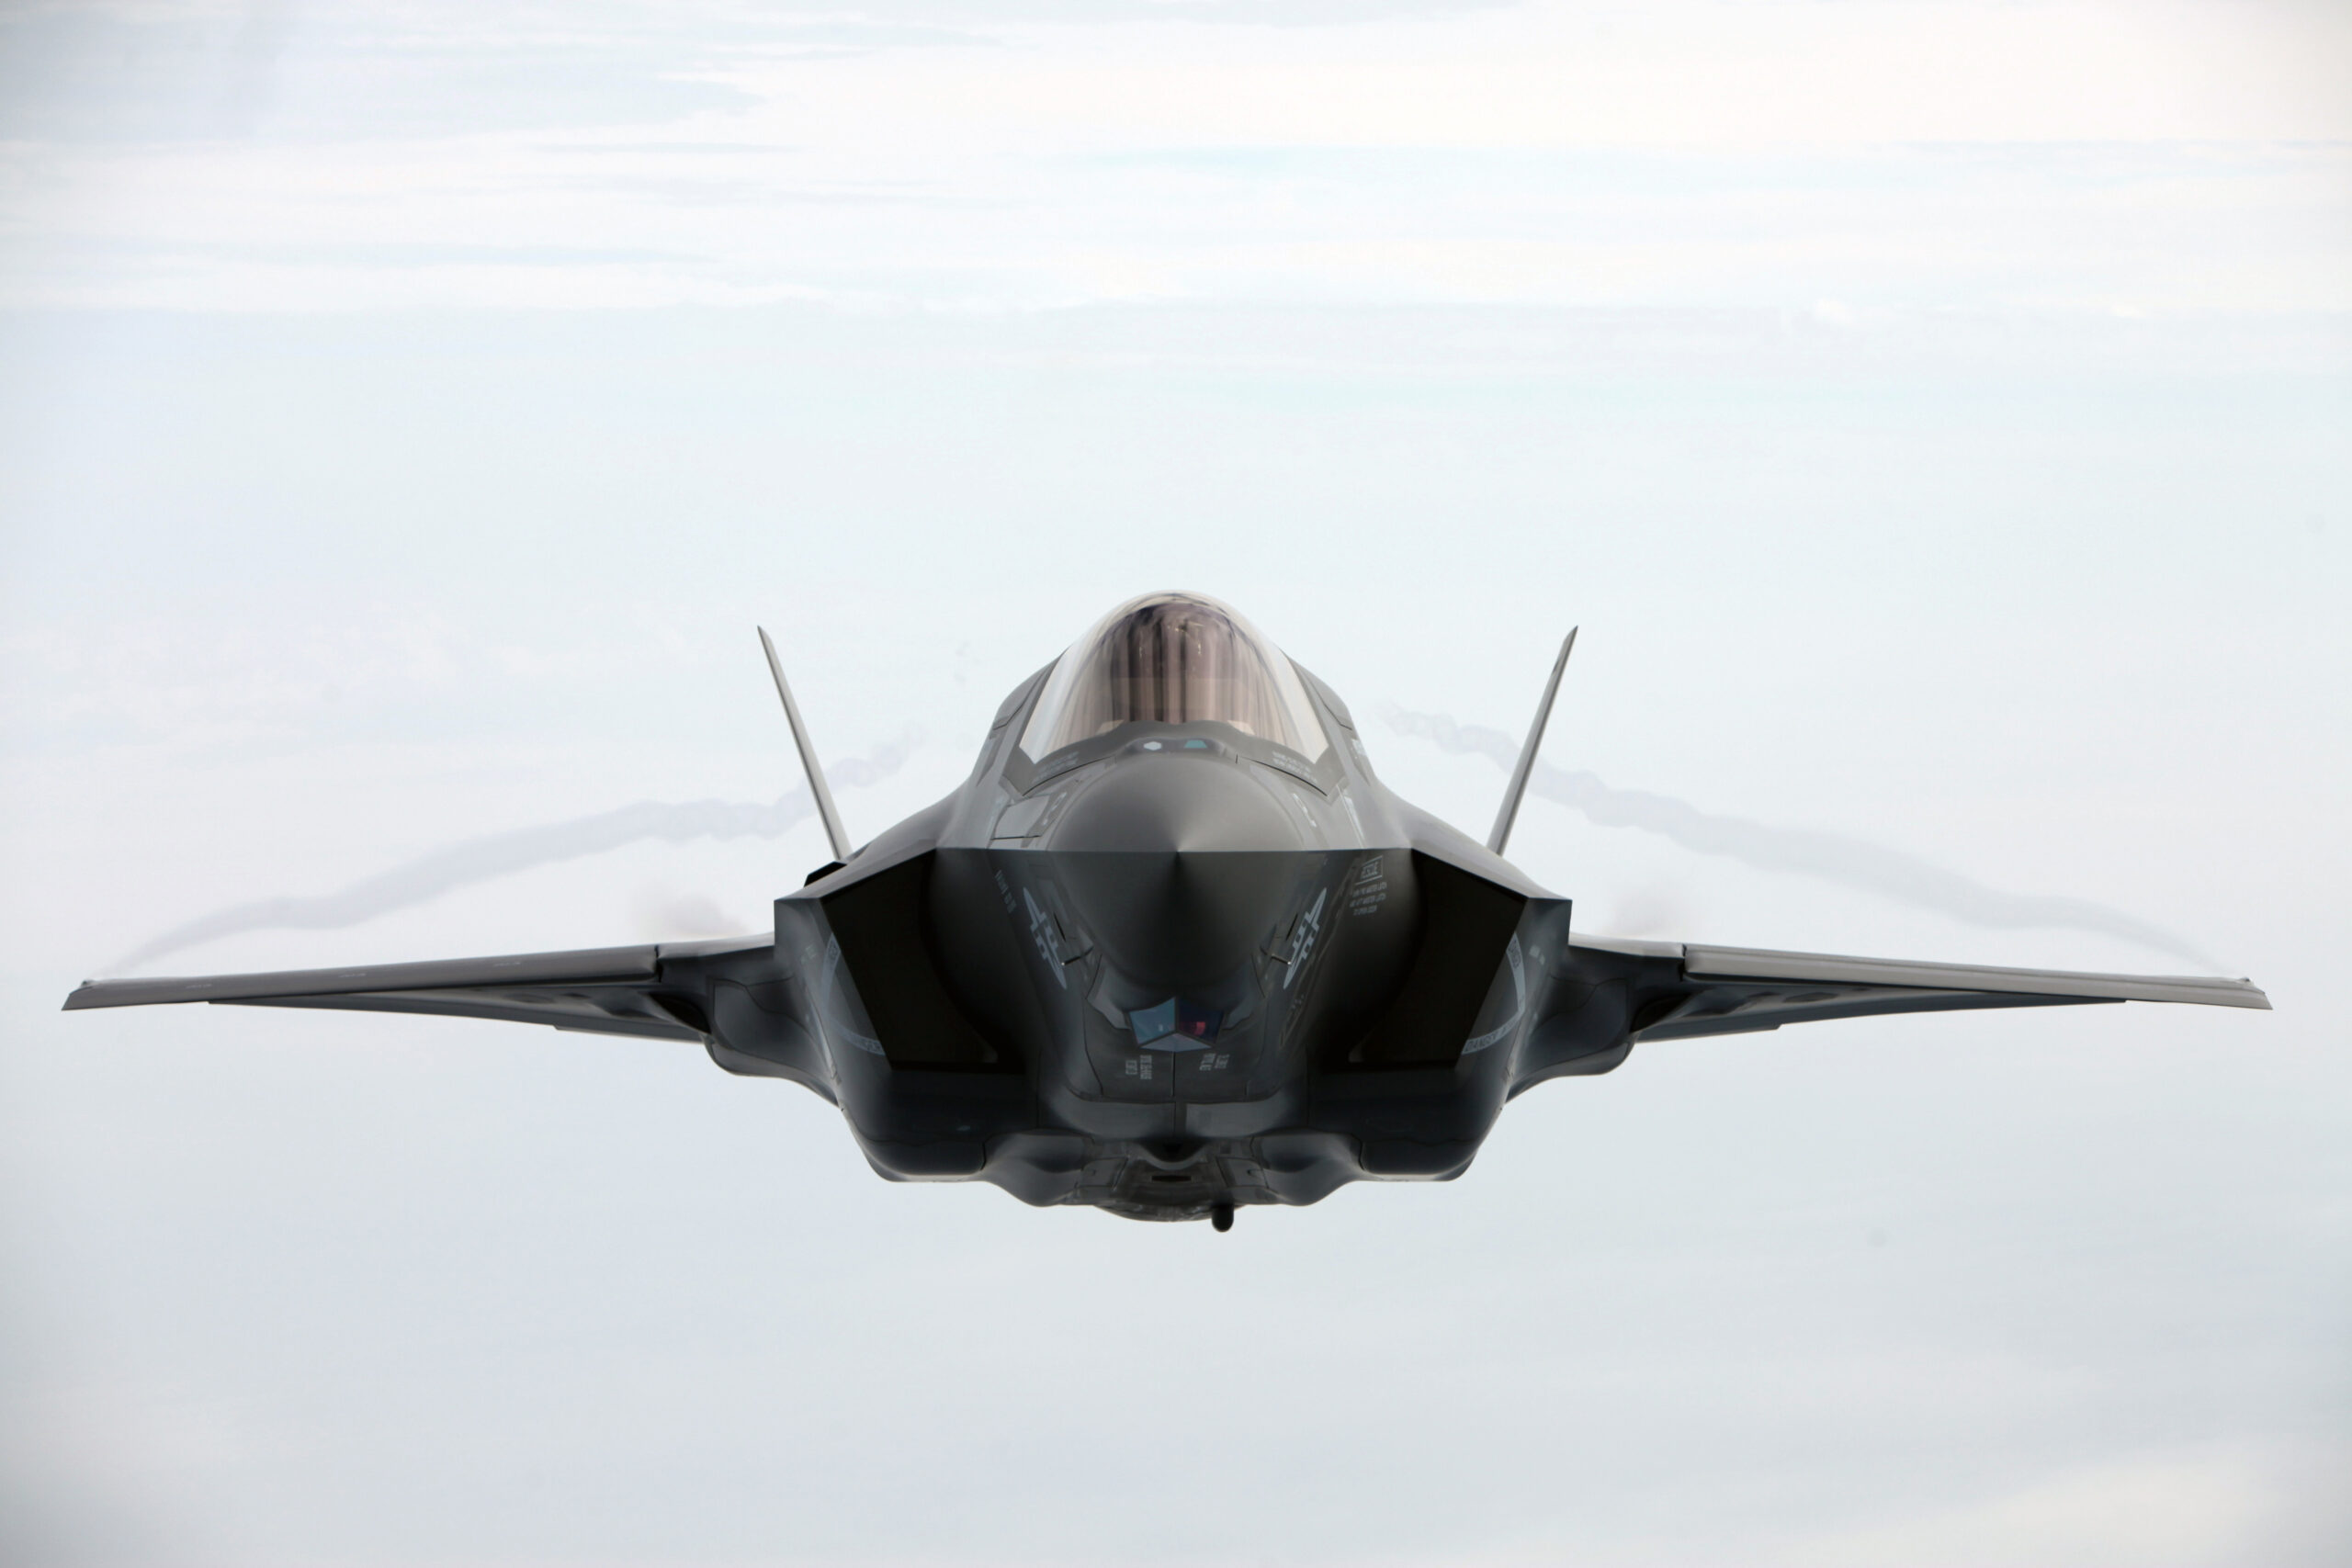 Operational Testers Flag F-35 Software Issues